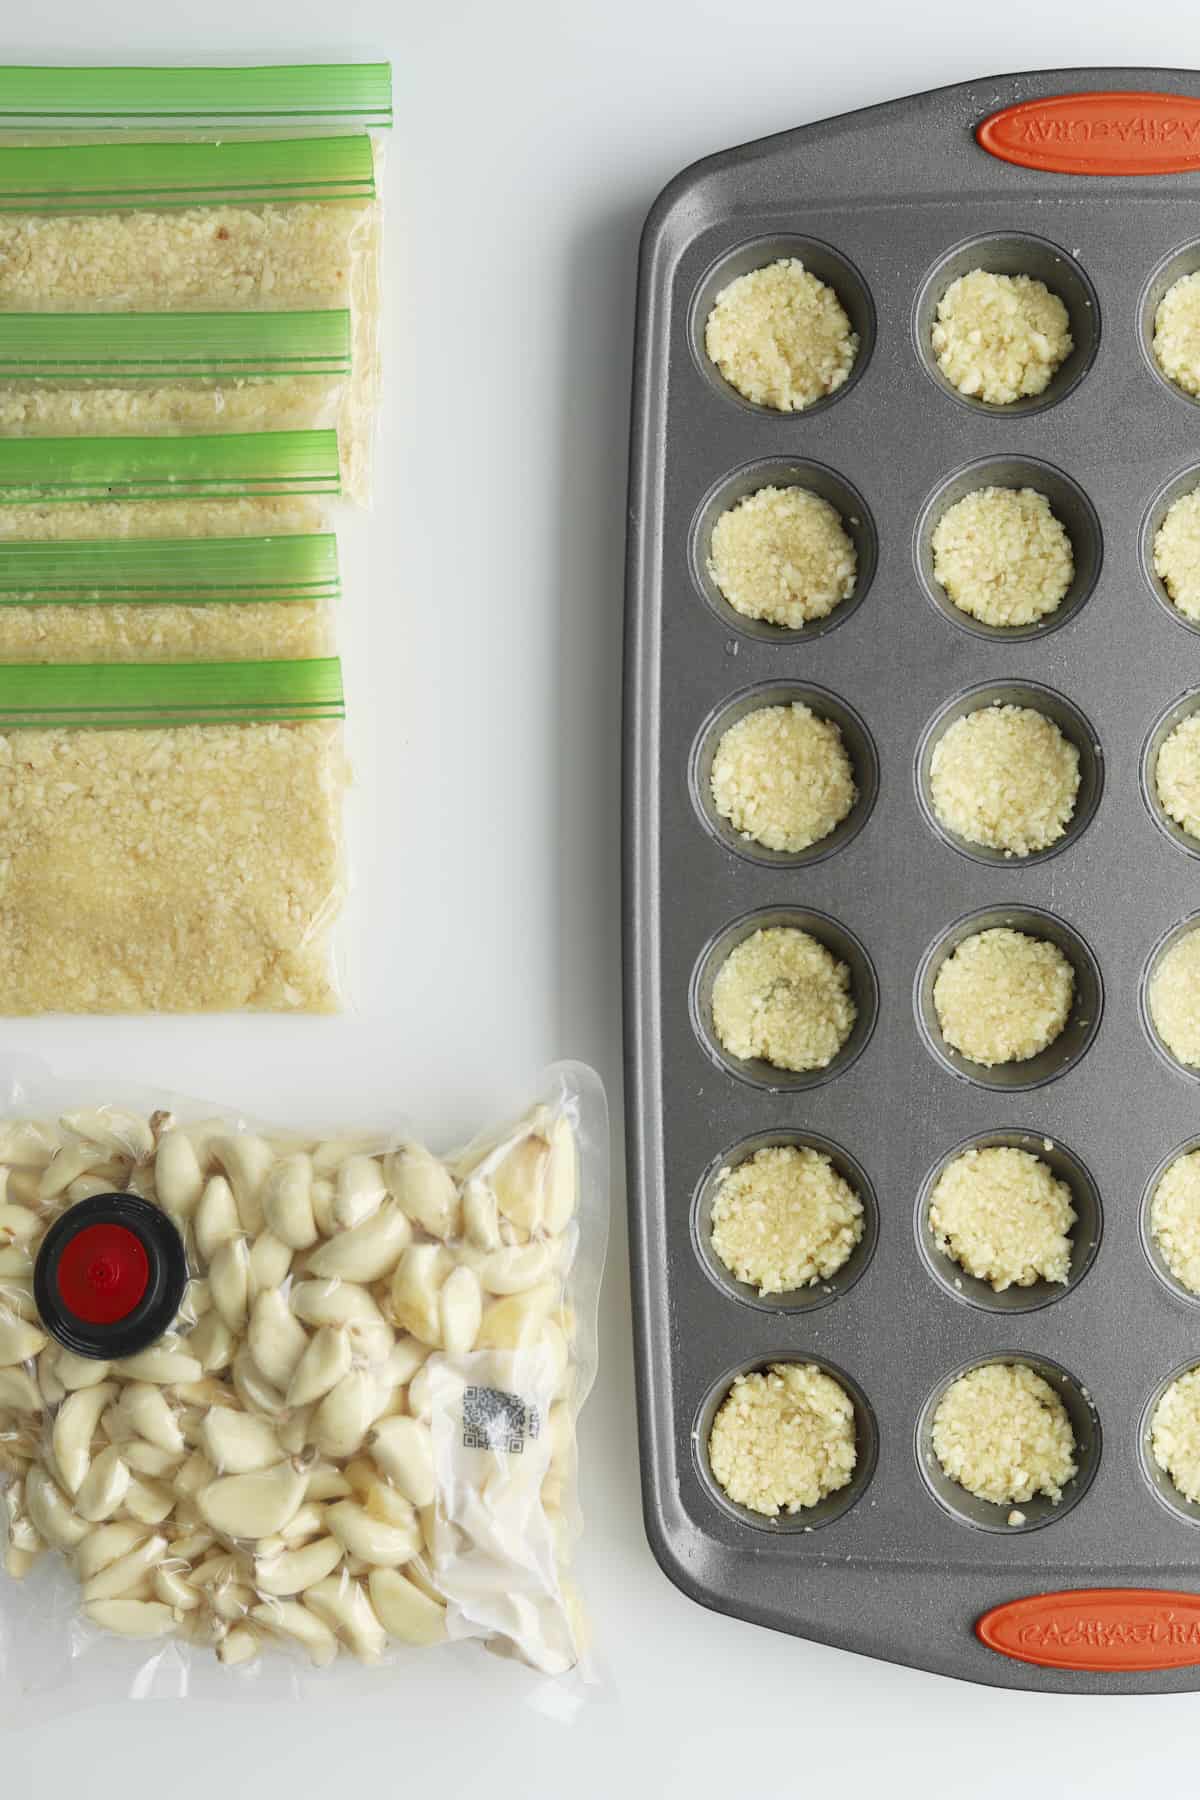 garlic in a muffin tin, small bags, and air tight bag